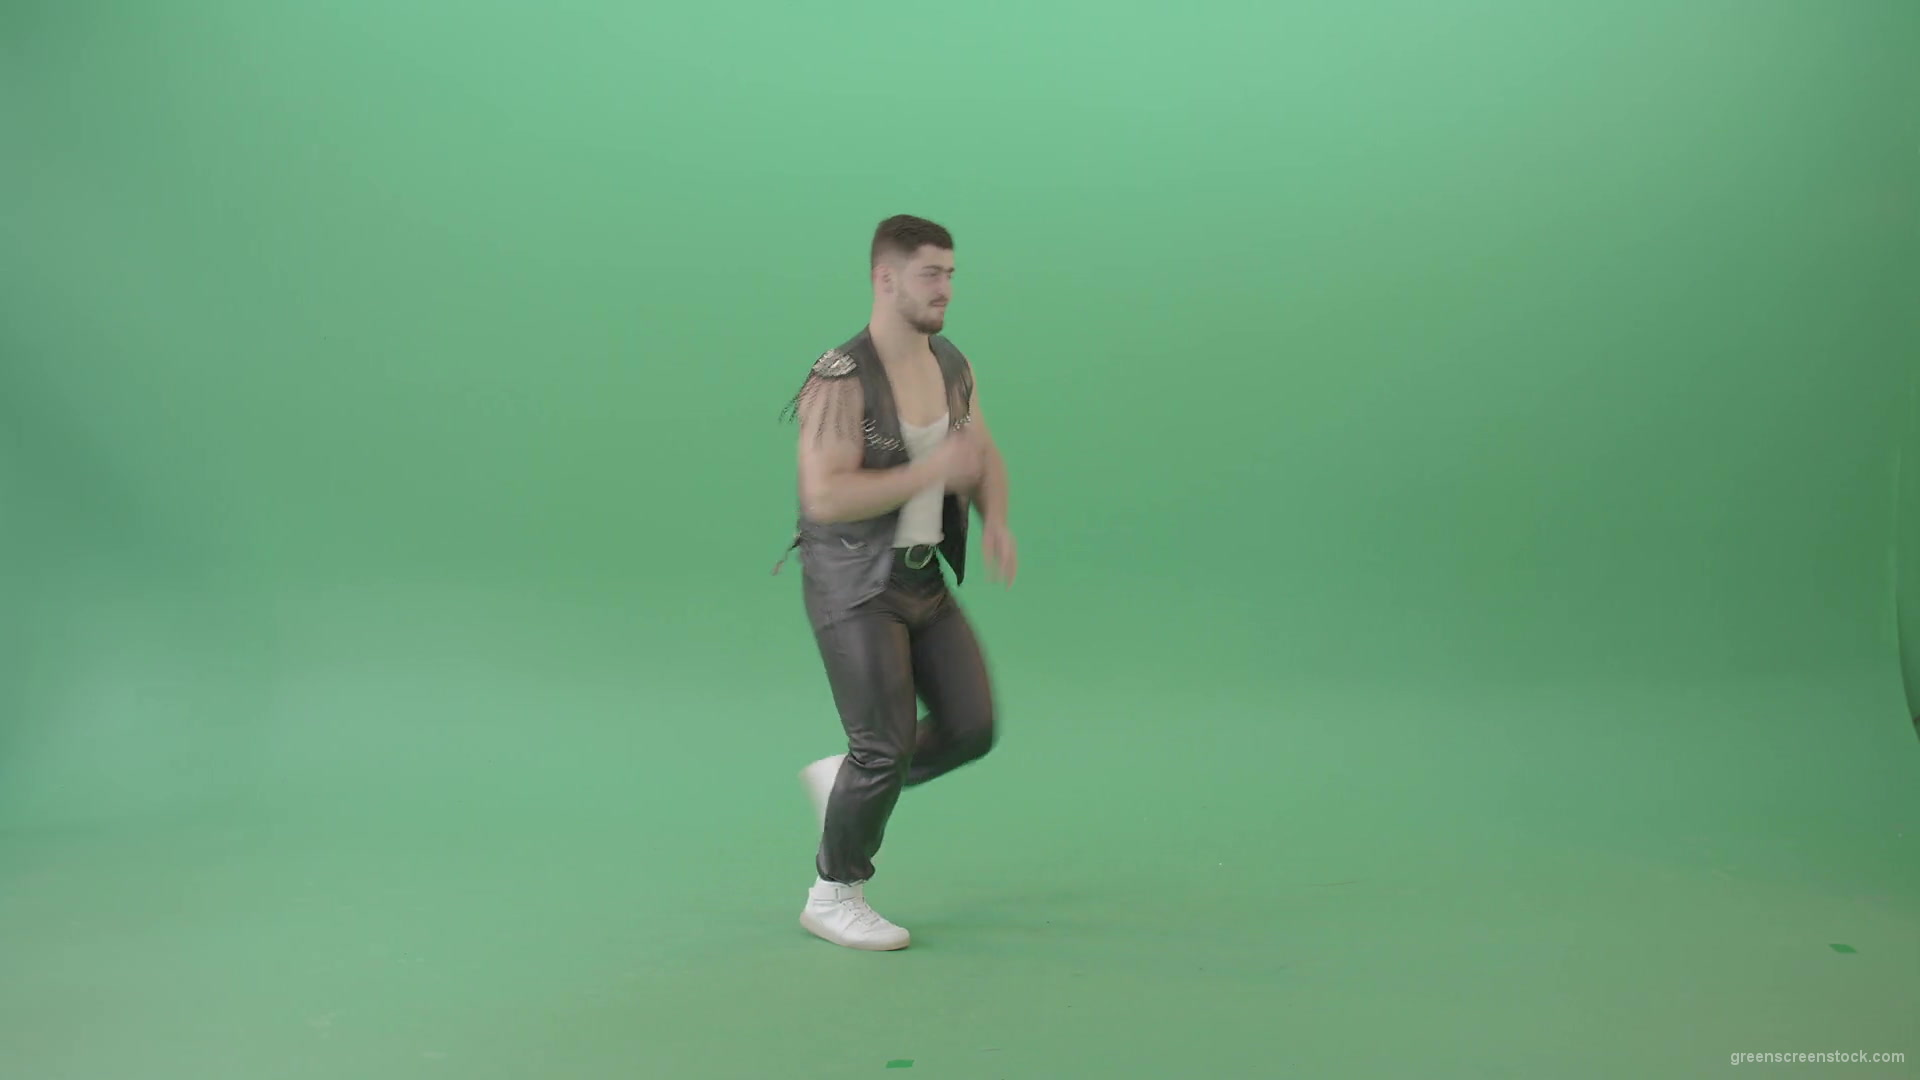 Angry-caucasian-Man-in-Black-leather-costume-dancing-Pop-Moves-on-Green-Screen-4K-Video-Footage-1920_004 Green Screen Stock